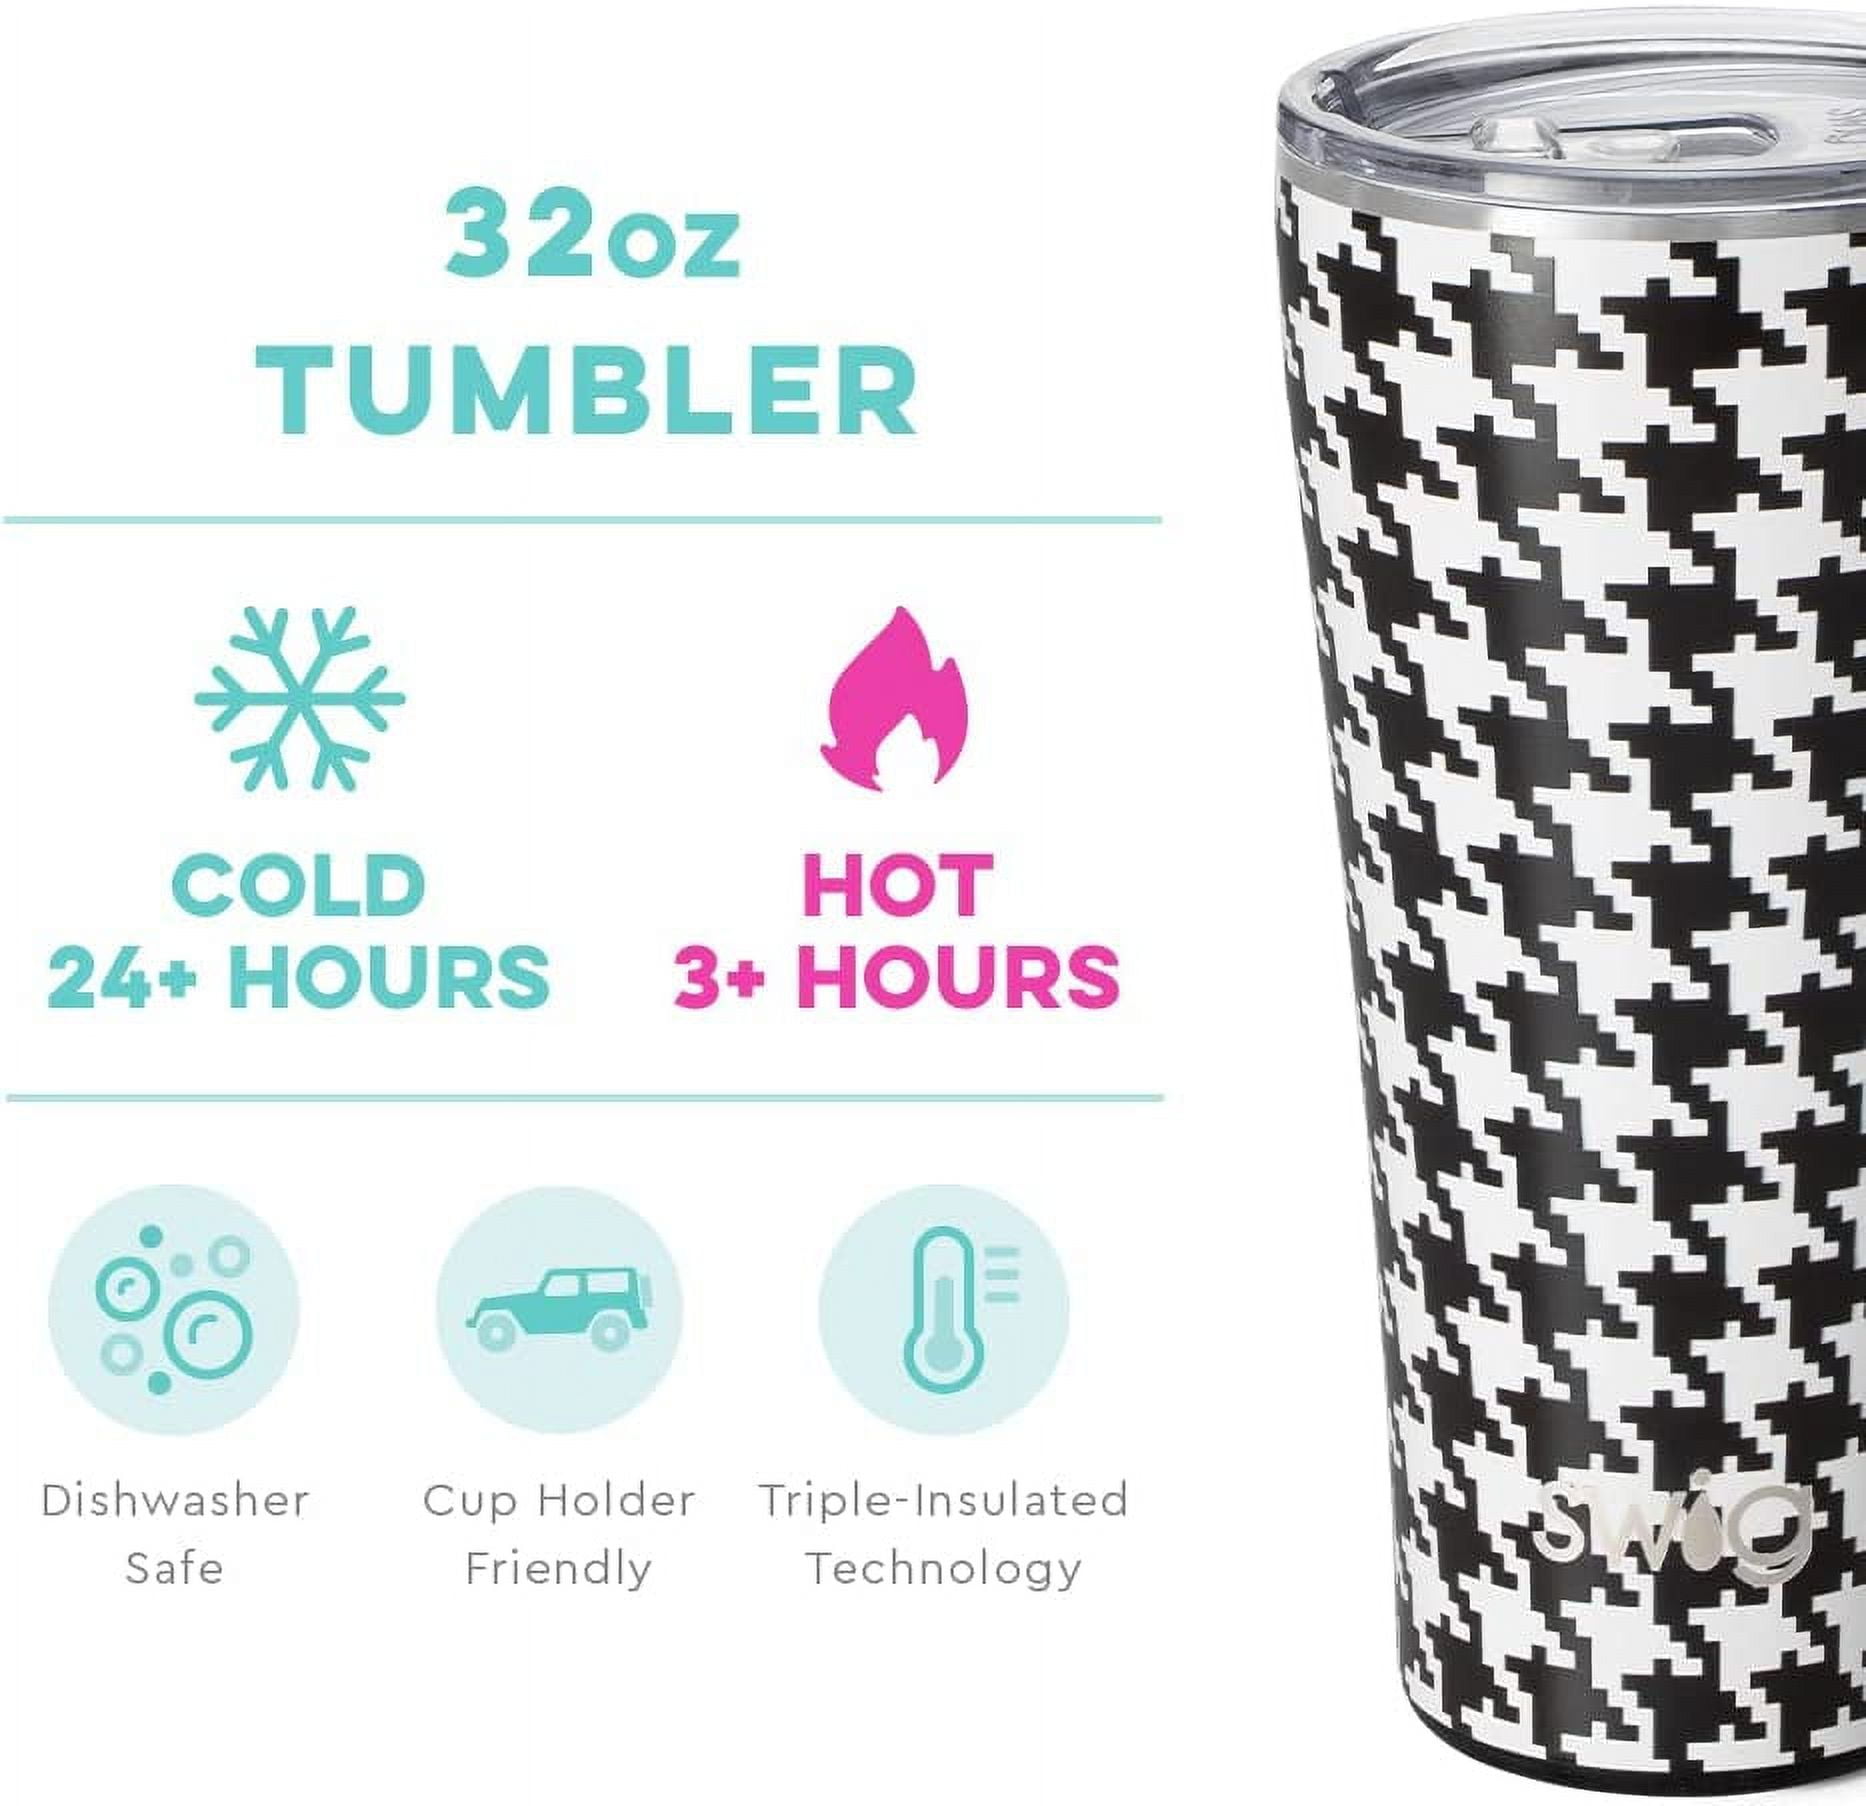 32 Oz. Swig Life(TM) Stainless Steel Golf Tumbler with your logo